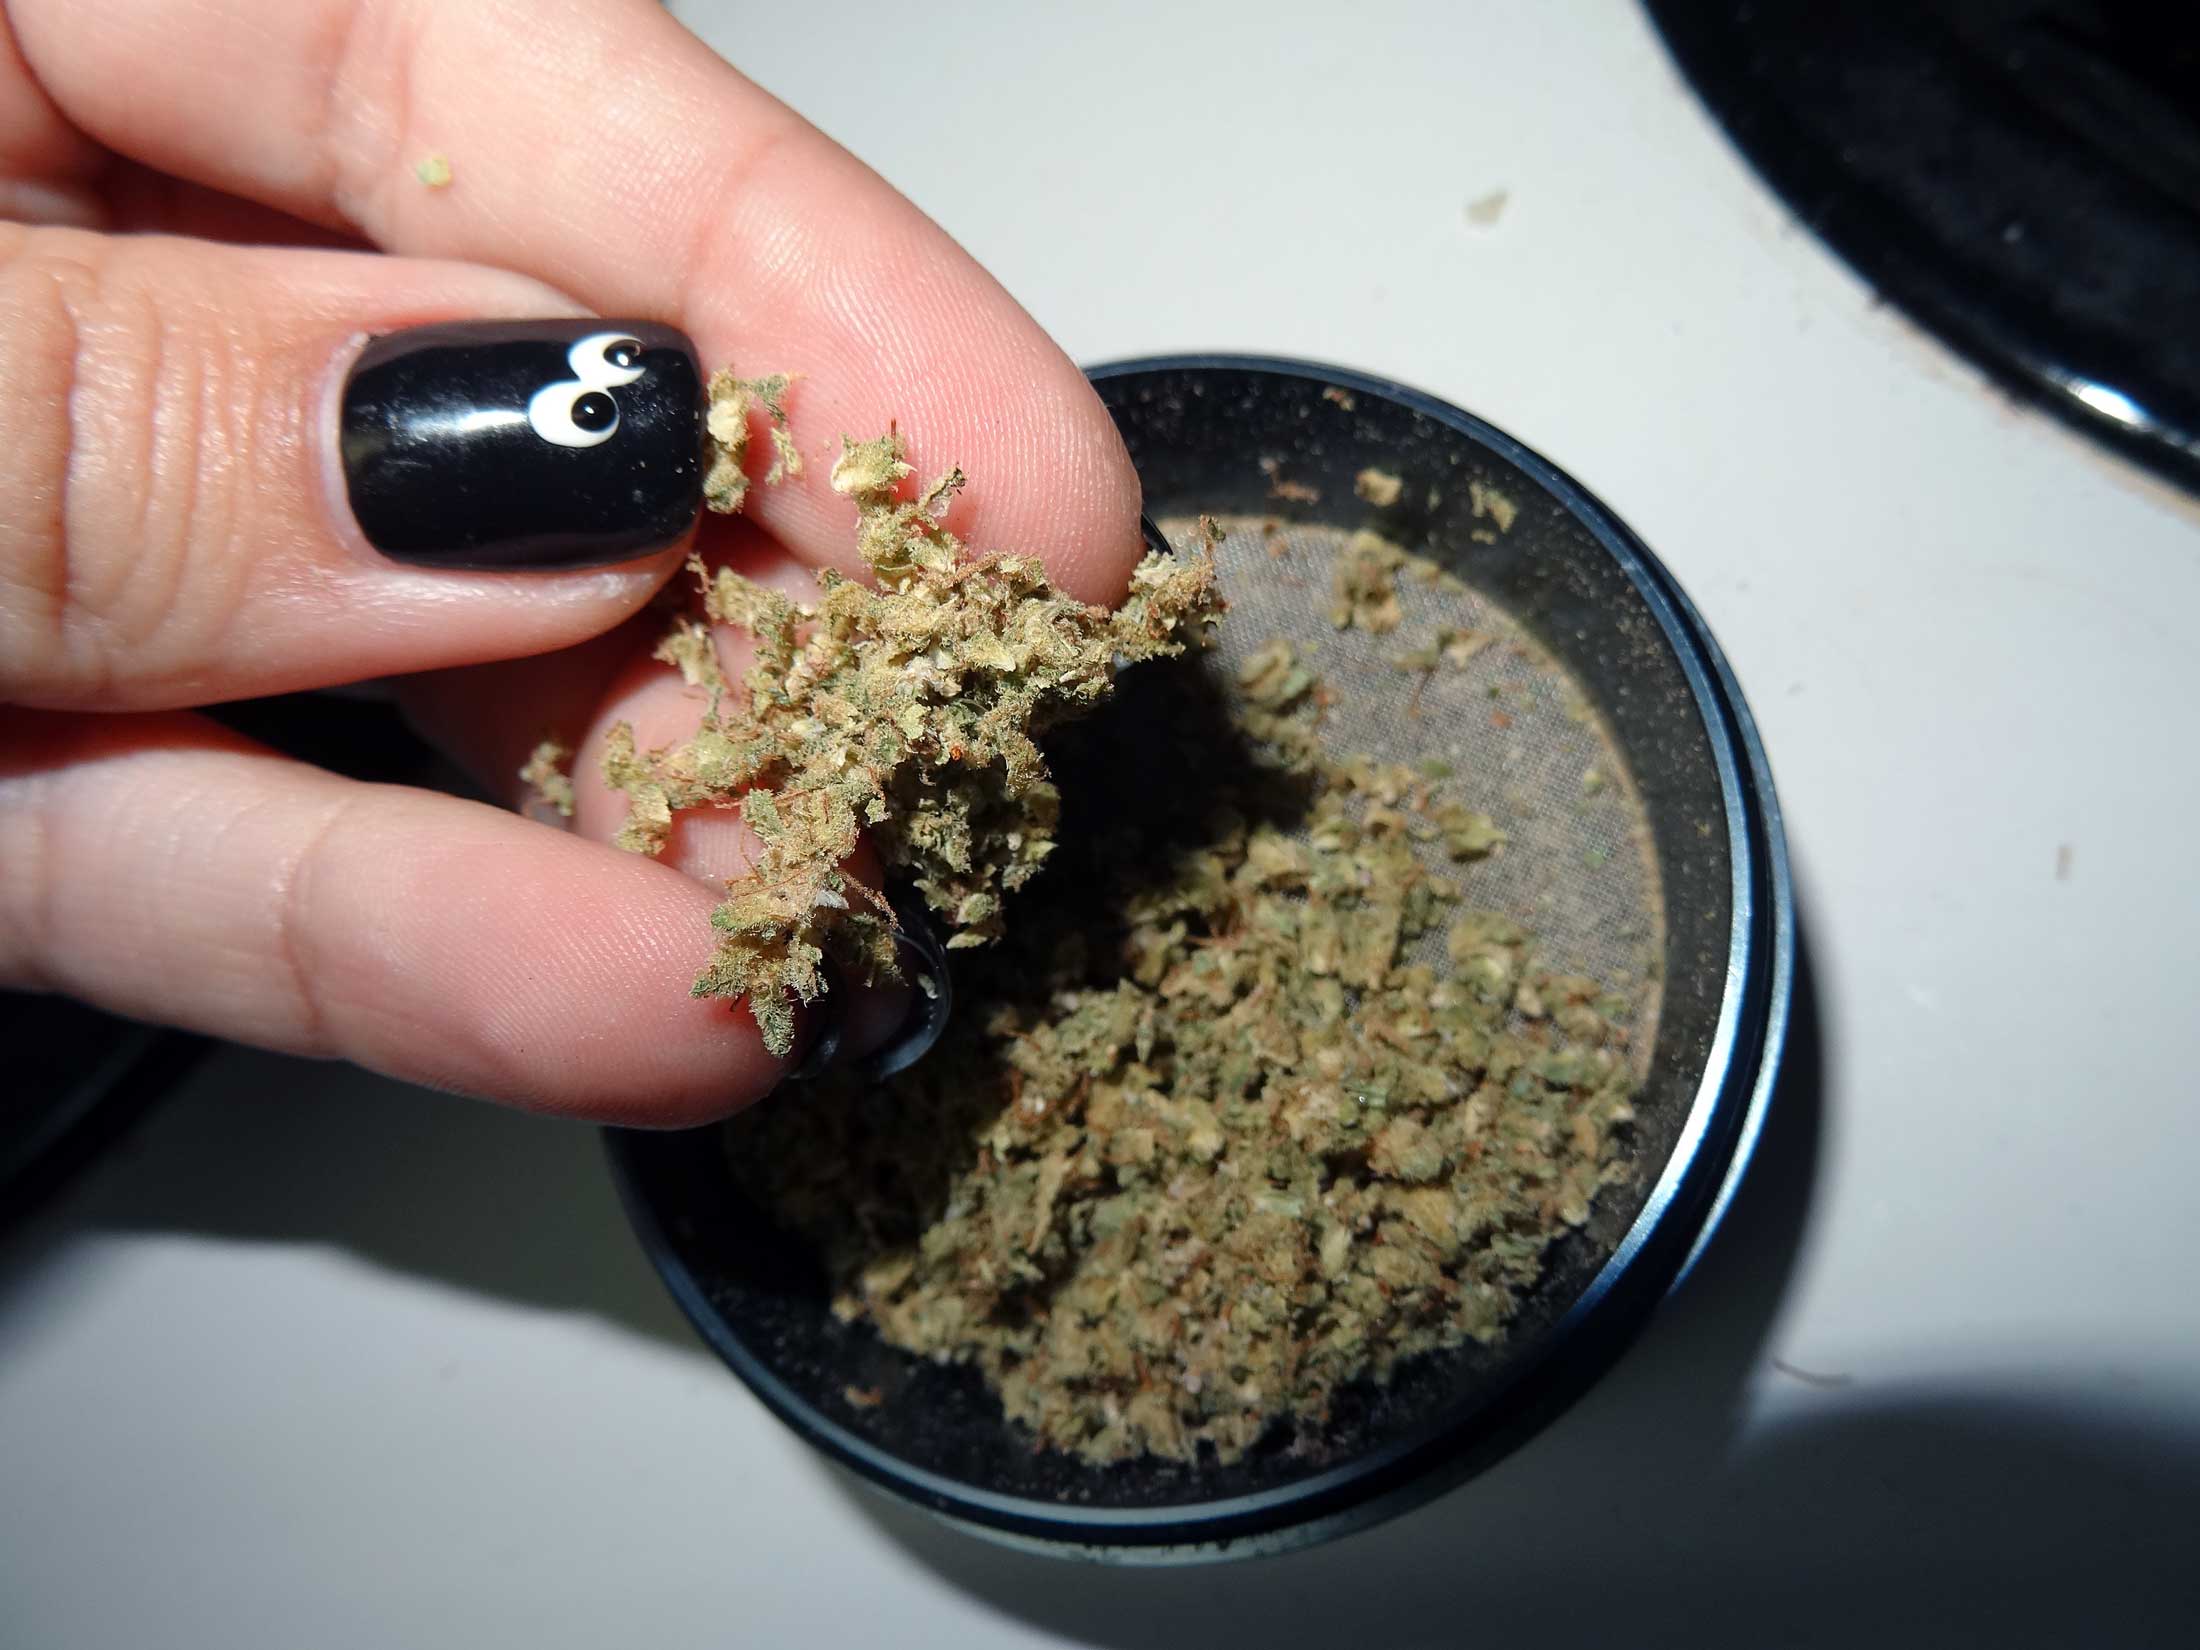 What's the best cannabis grinder?